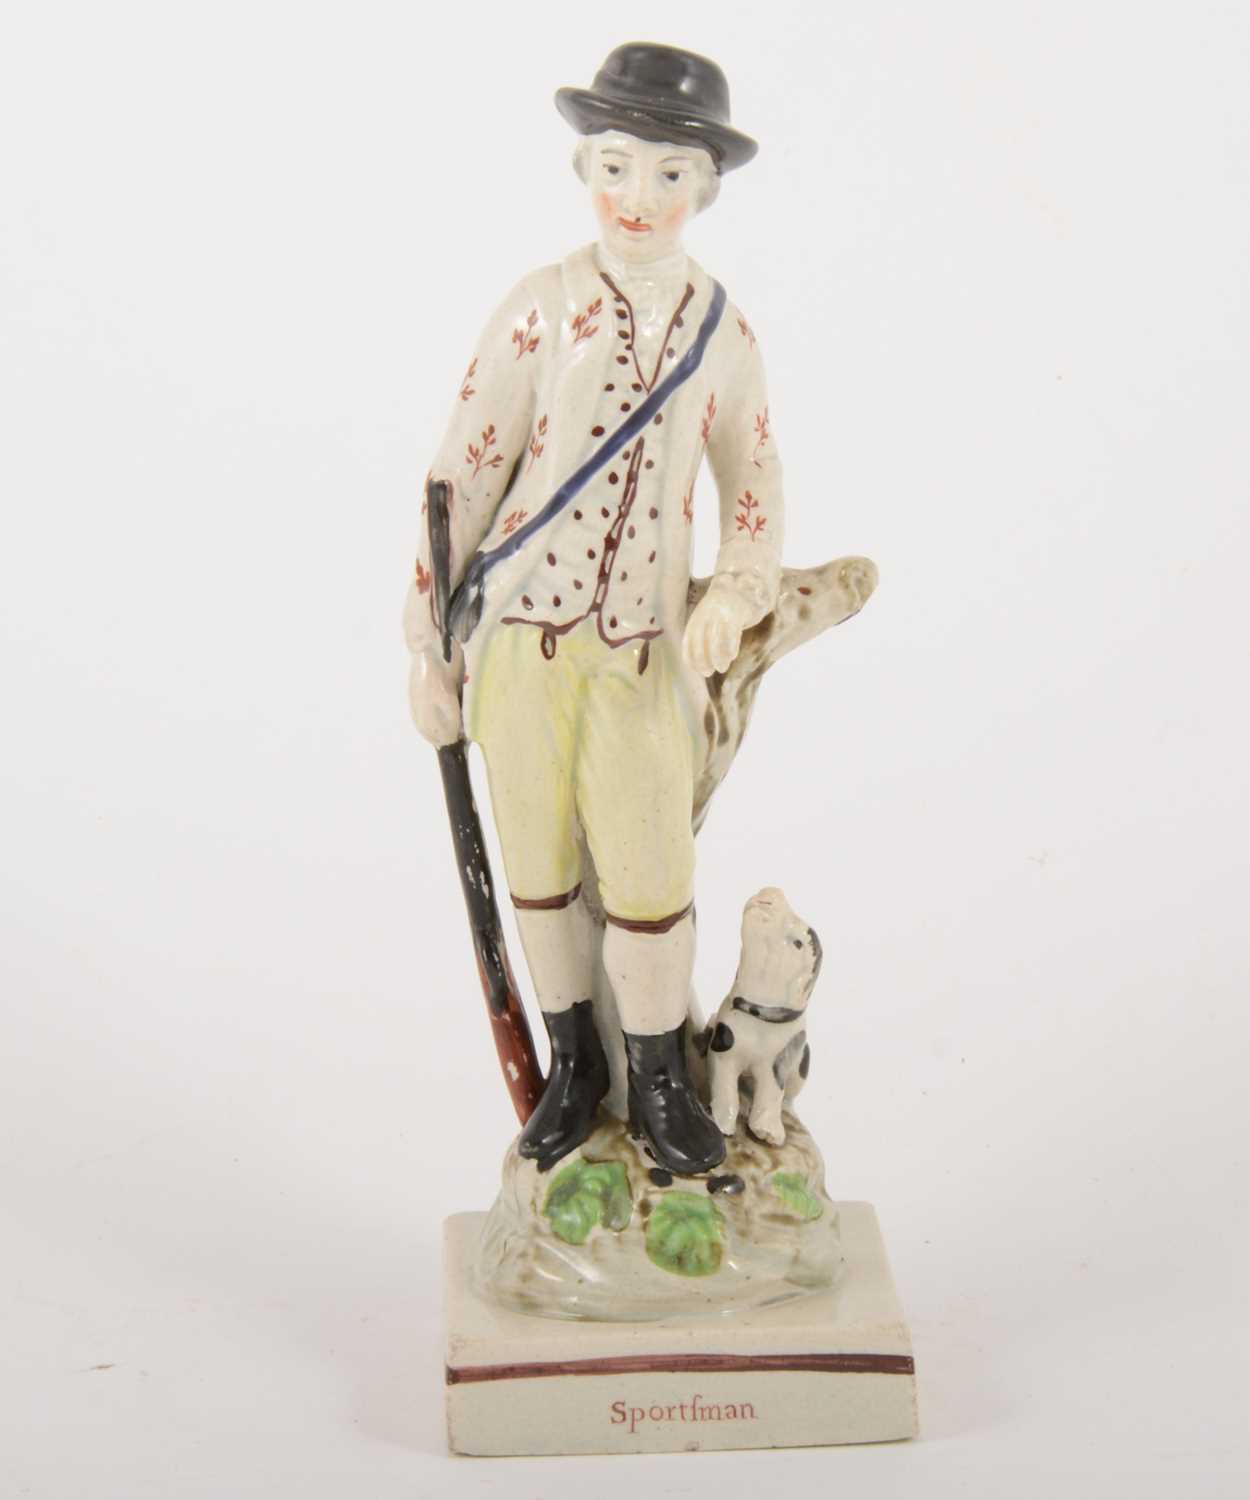 Lot 9 - A Staffordshire earthenware figure of a Sportsman, late 18th century